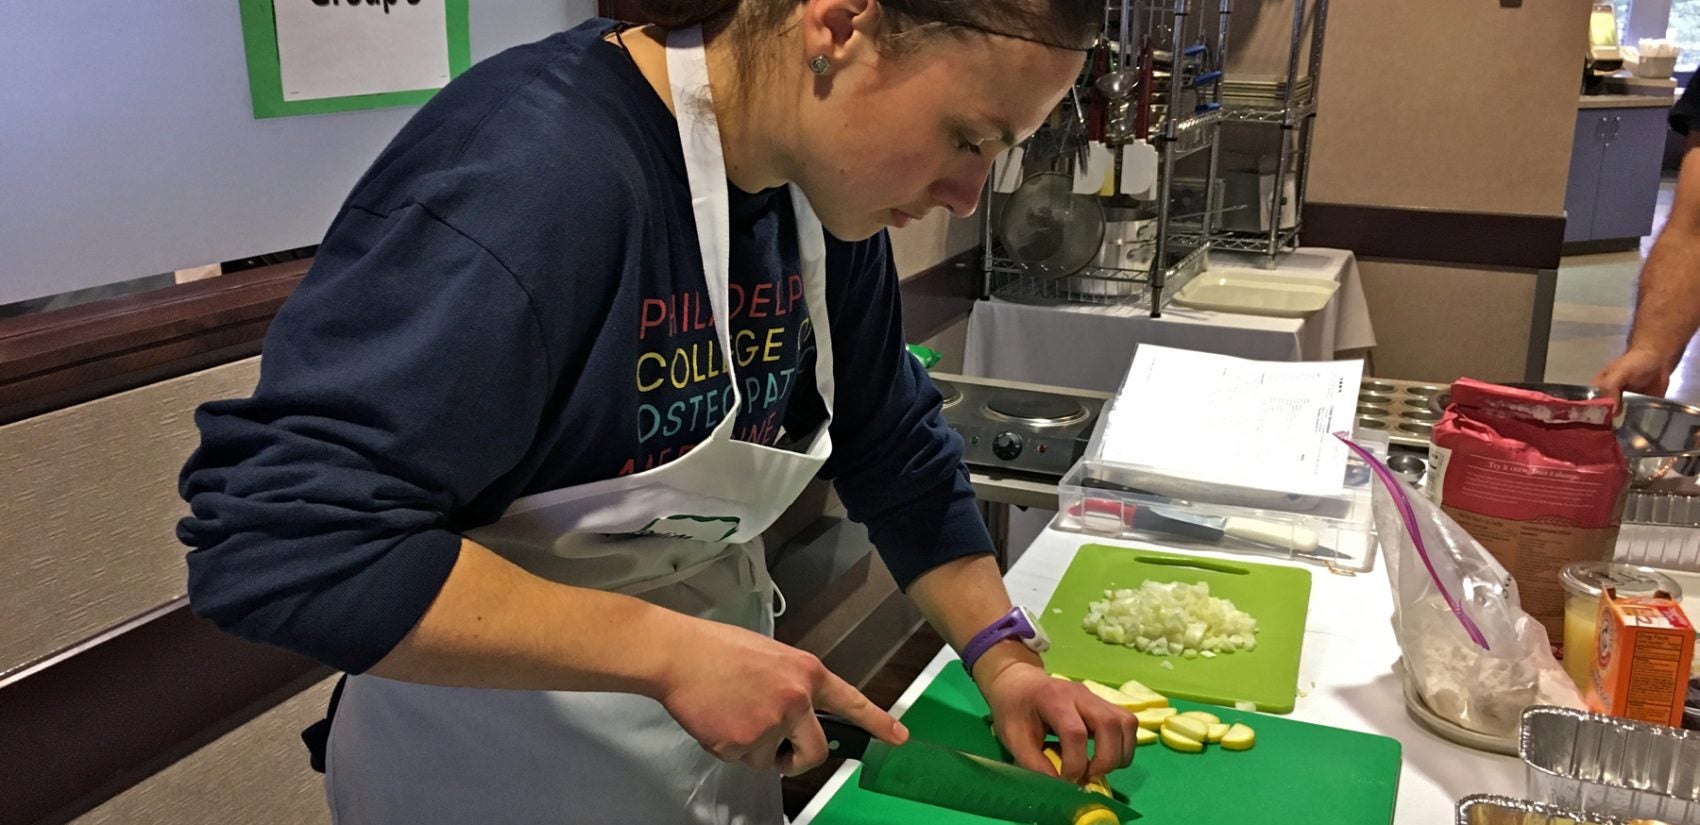 A pilot program at the Philadelphia College of Osteopathic Medicine gives students lessons on nutrition.